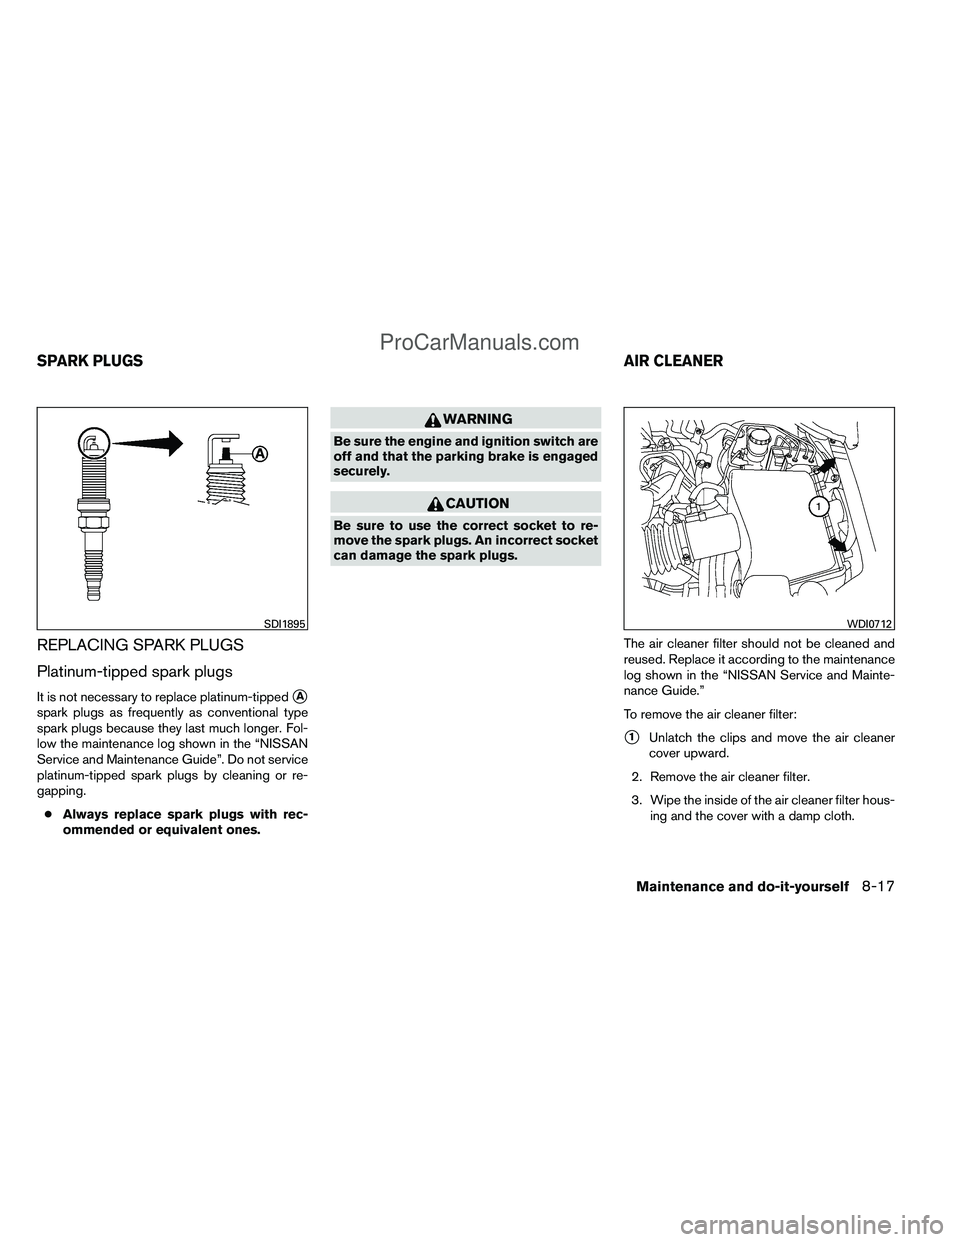 NISSAN TITAN 2012  Owners Manual REPLACING SPARK PLUGS
Platinum-tipped spark plugs
It is not necessary to replace platinum-tippedA
spark plugs as frequently as conventional type
spark plugs because they last much longer. Fol-
low th